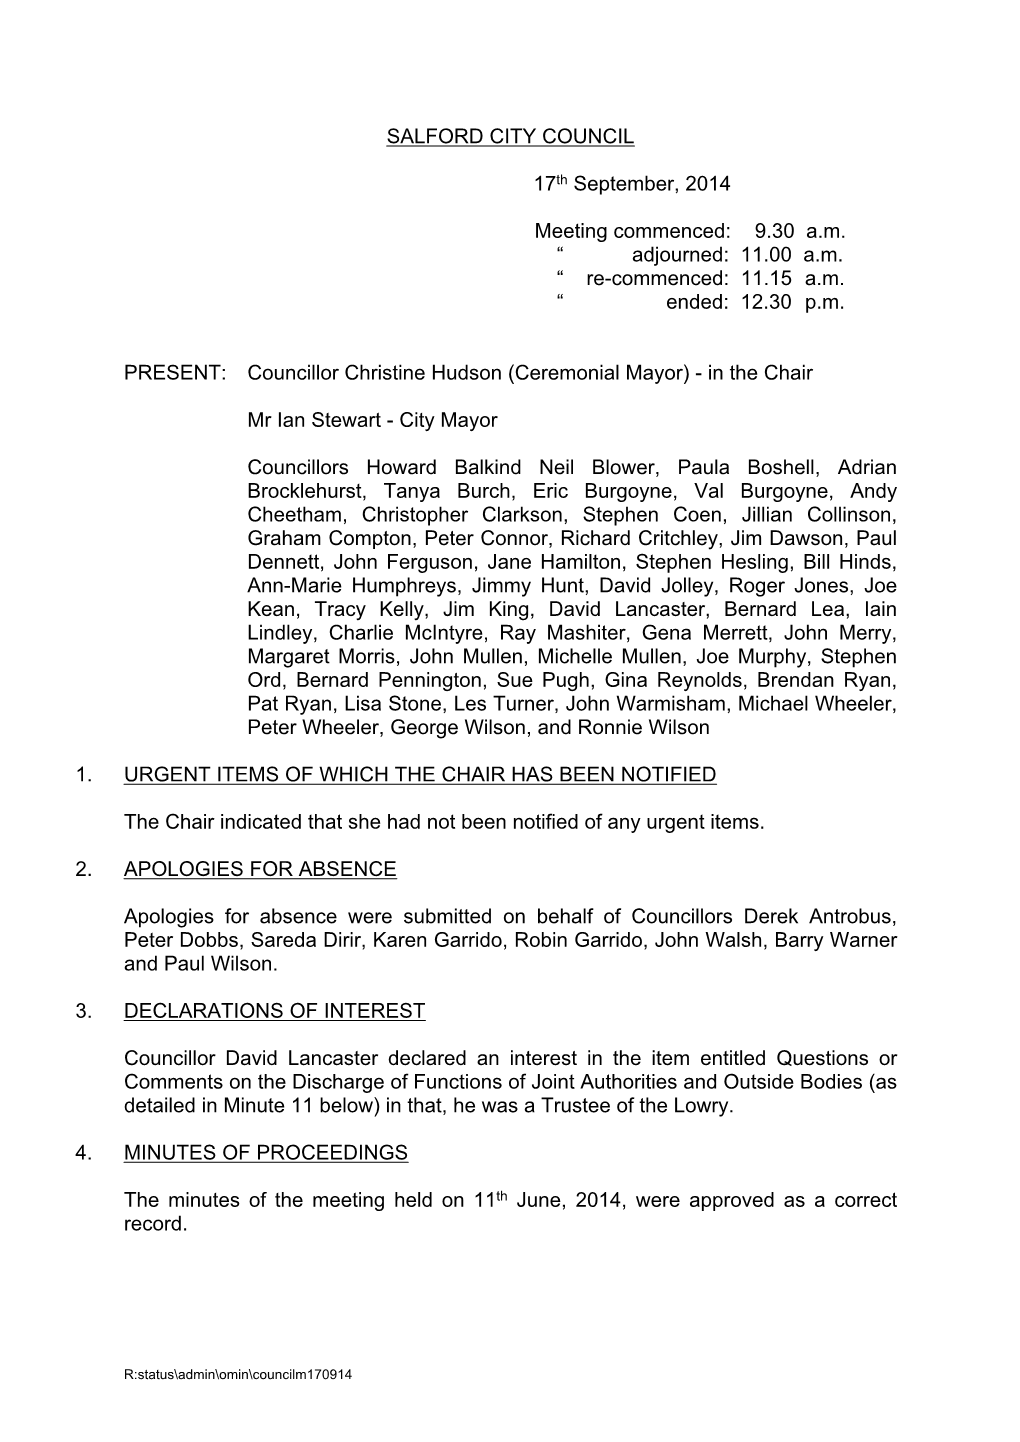 SALFORD CITY COUNCIL 17Th September, 2014 Meeting Commenced